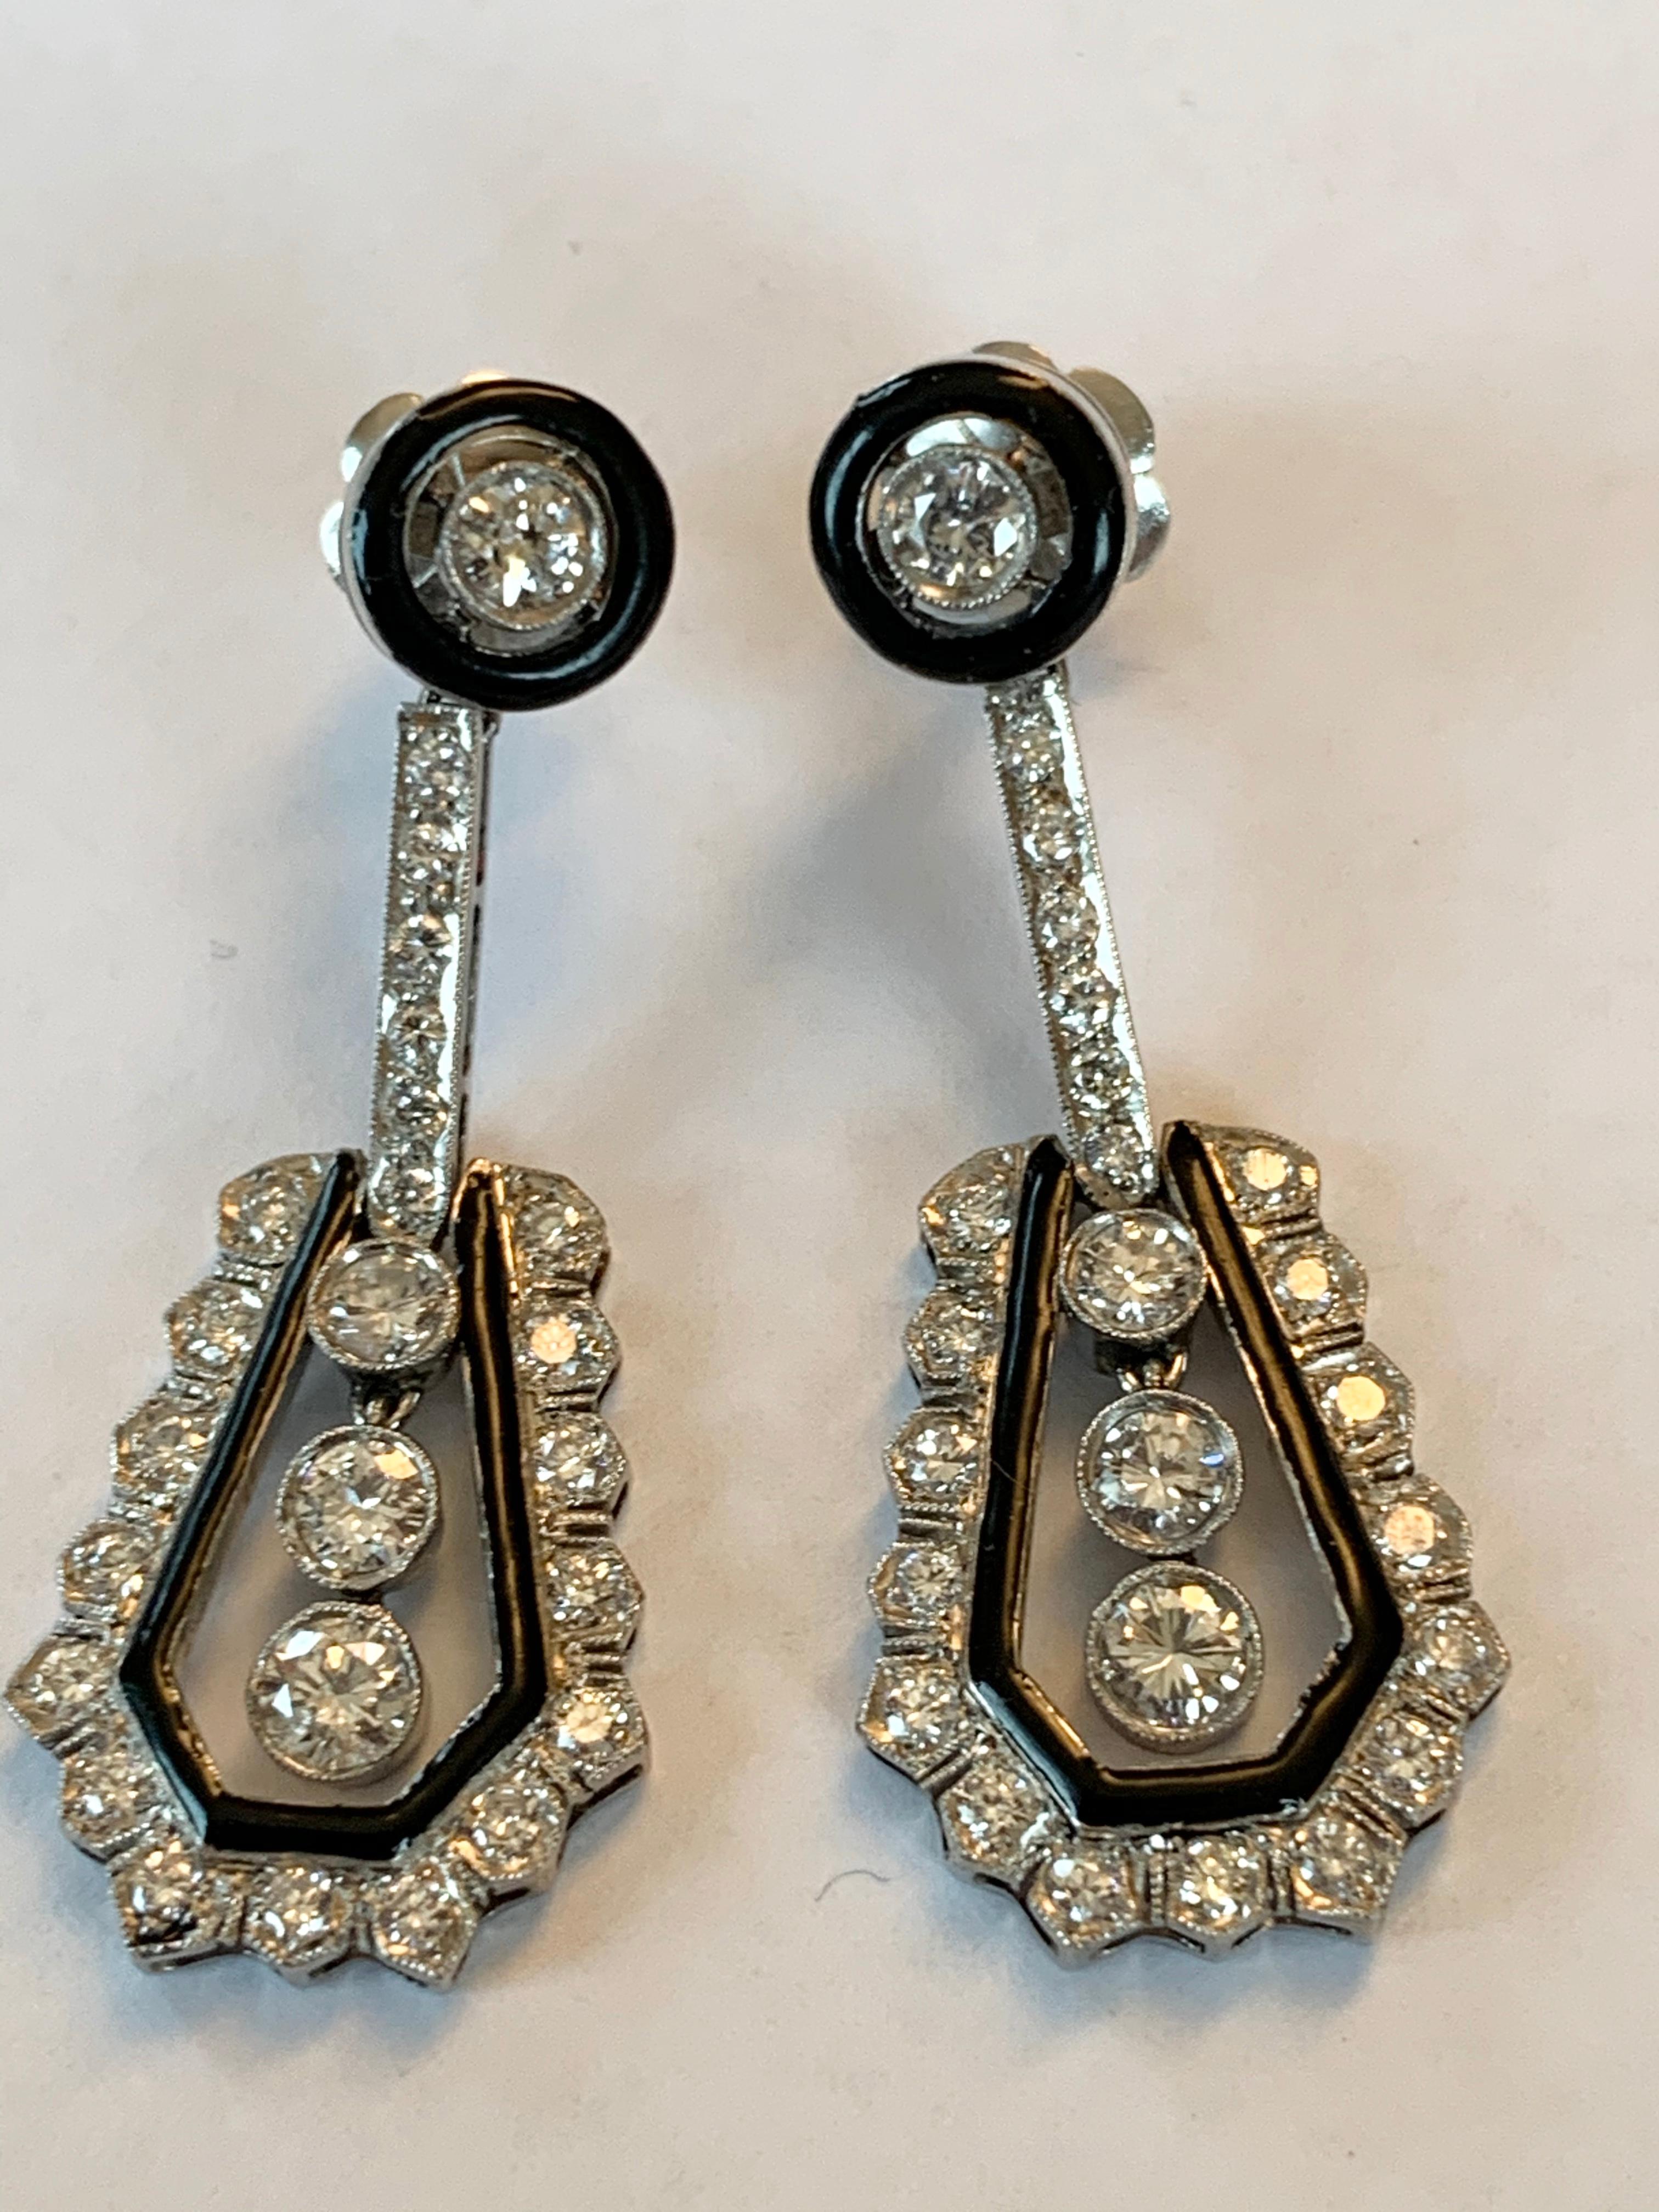 Sign of Distinction and understatement. A pair of Platinum Art Déco Diamond and Enamel pendant earrings. The row of 3 diamonds in the centre move gently when worn. 